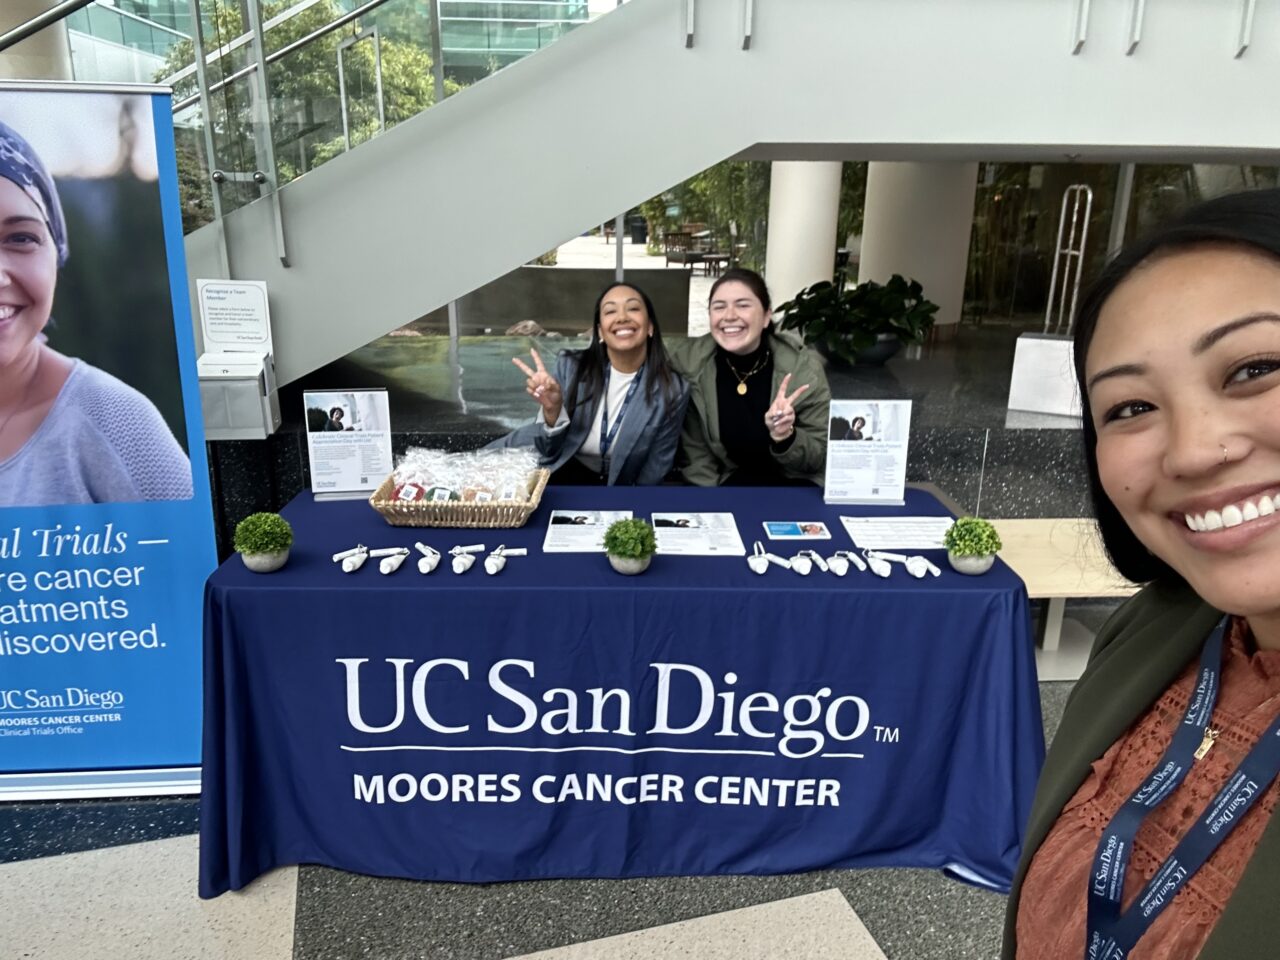 Here to promote Clinical Trials Appreciation Day – UCSD Health Moores Cancer Center COE